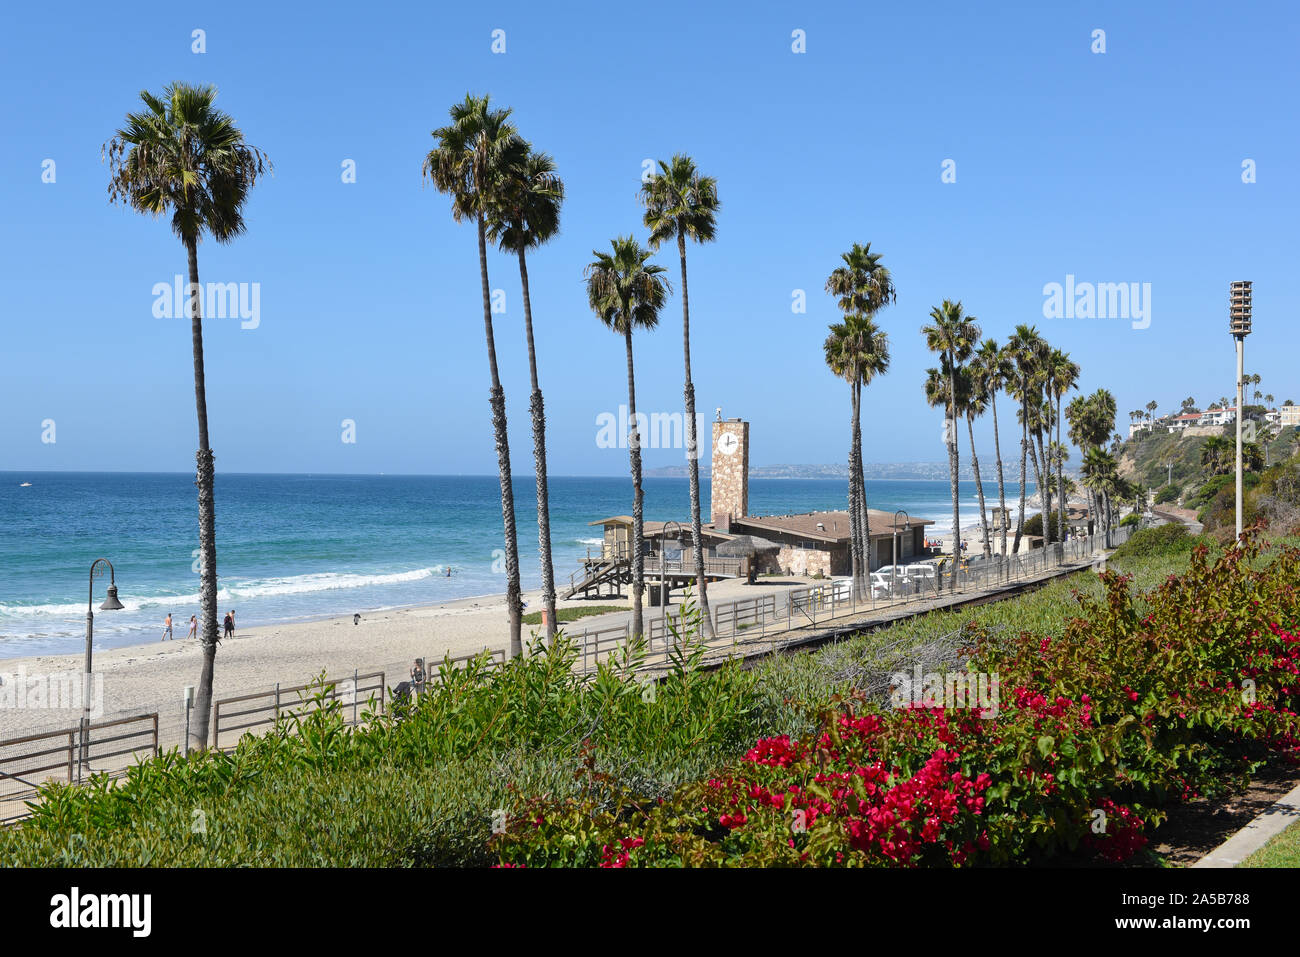 SAN CLEMENTE, CALIFORNIA - 18 OCT 2019: The ocean and beach seen from Parque del Mar with clock tower and train tracks. Stock Photo